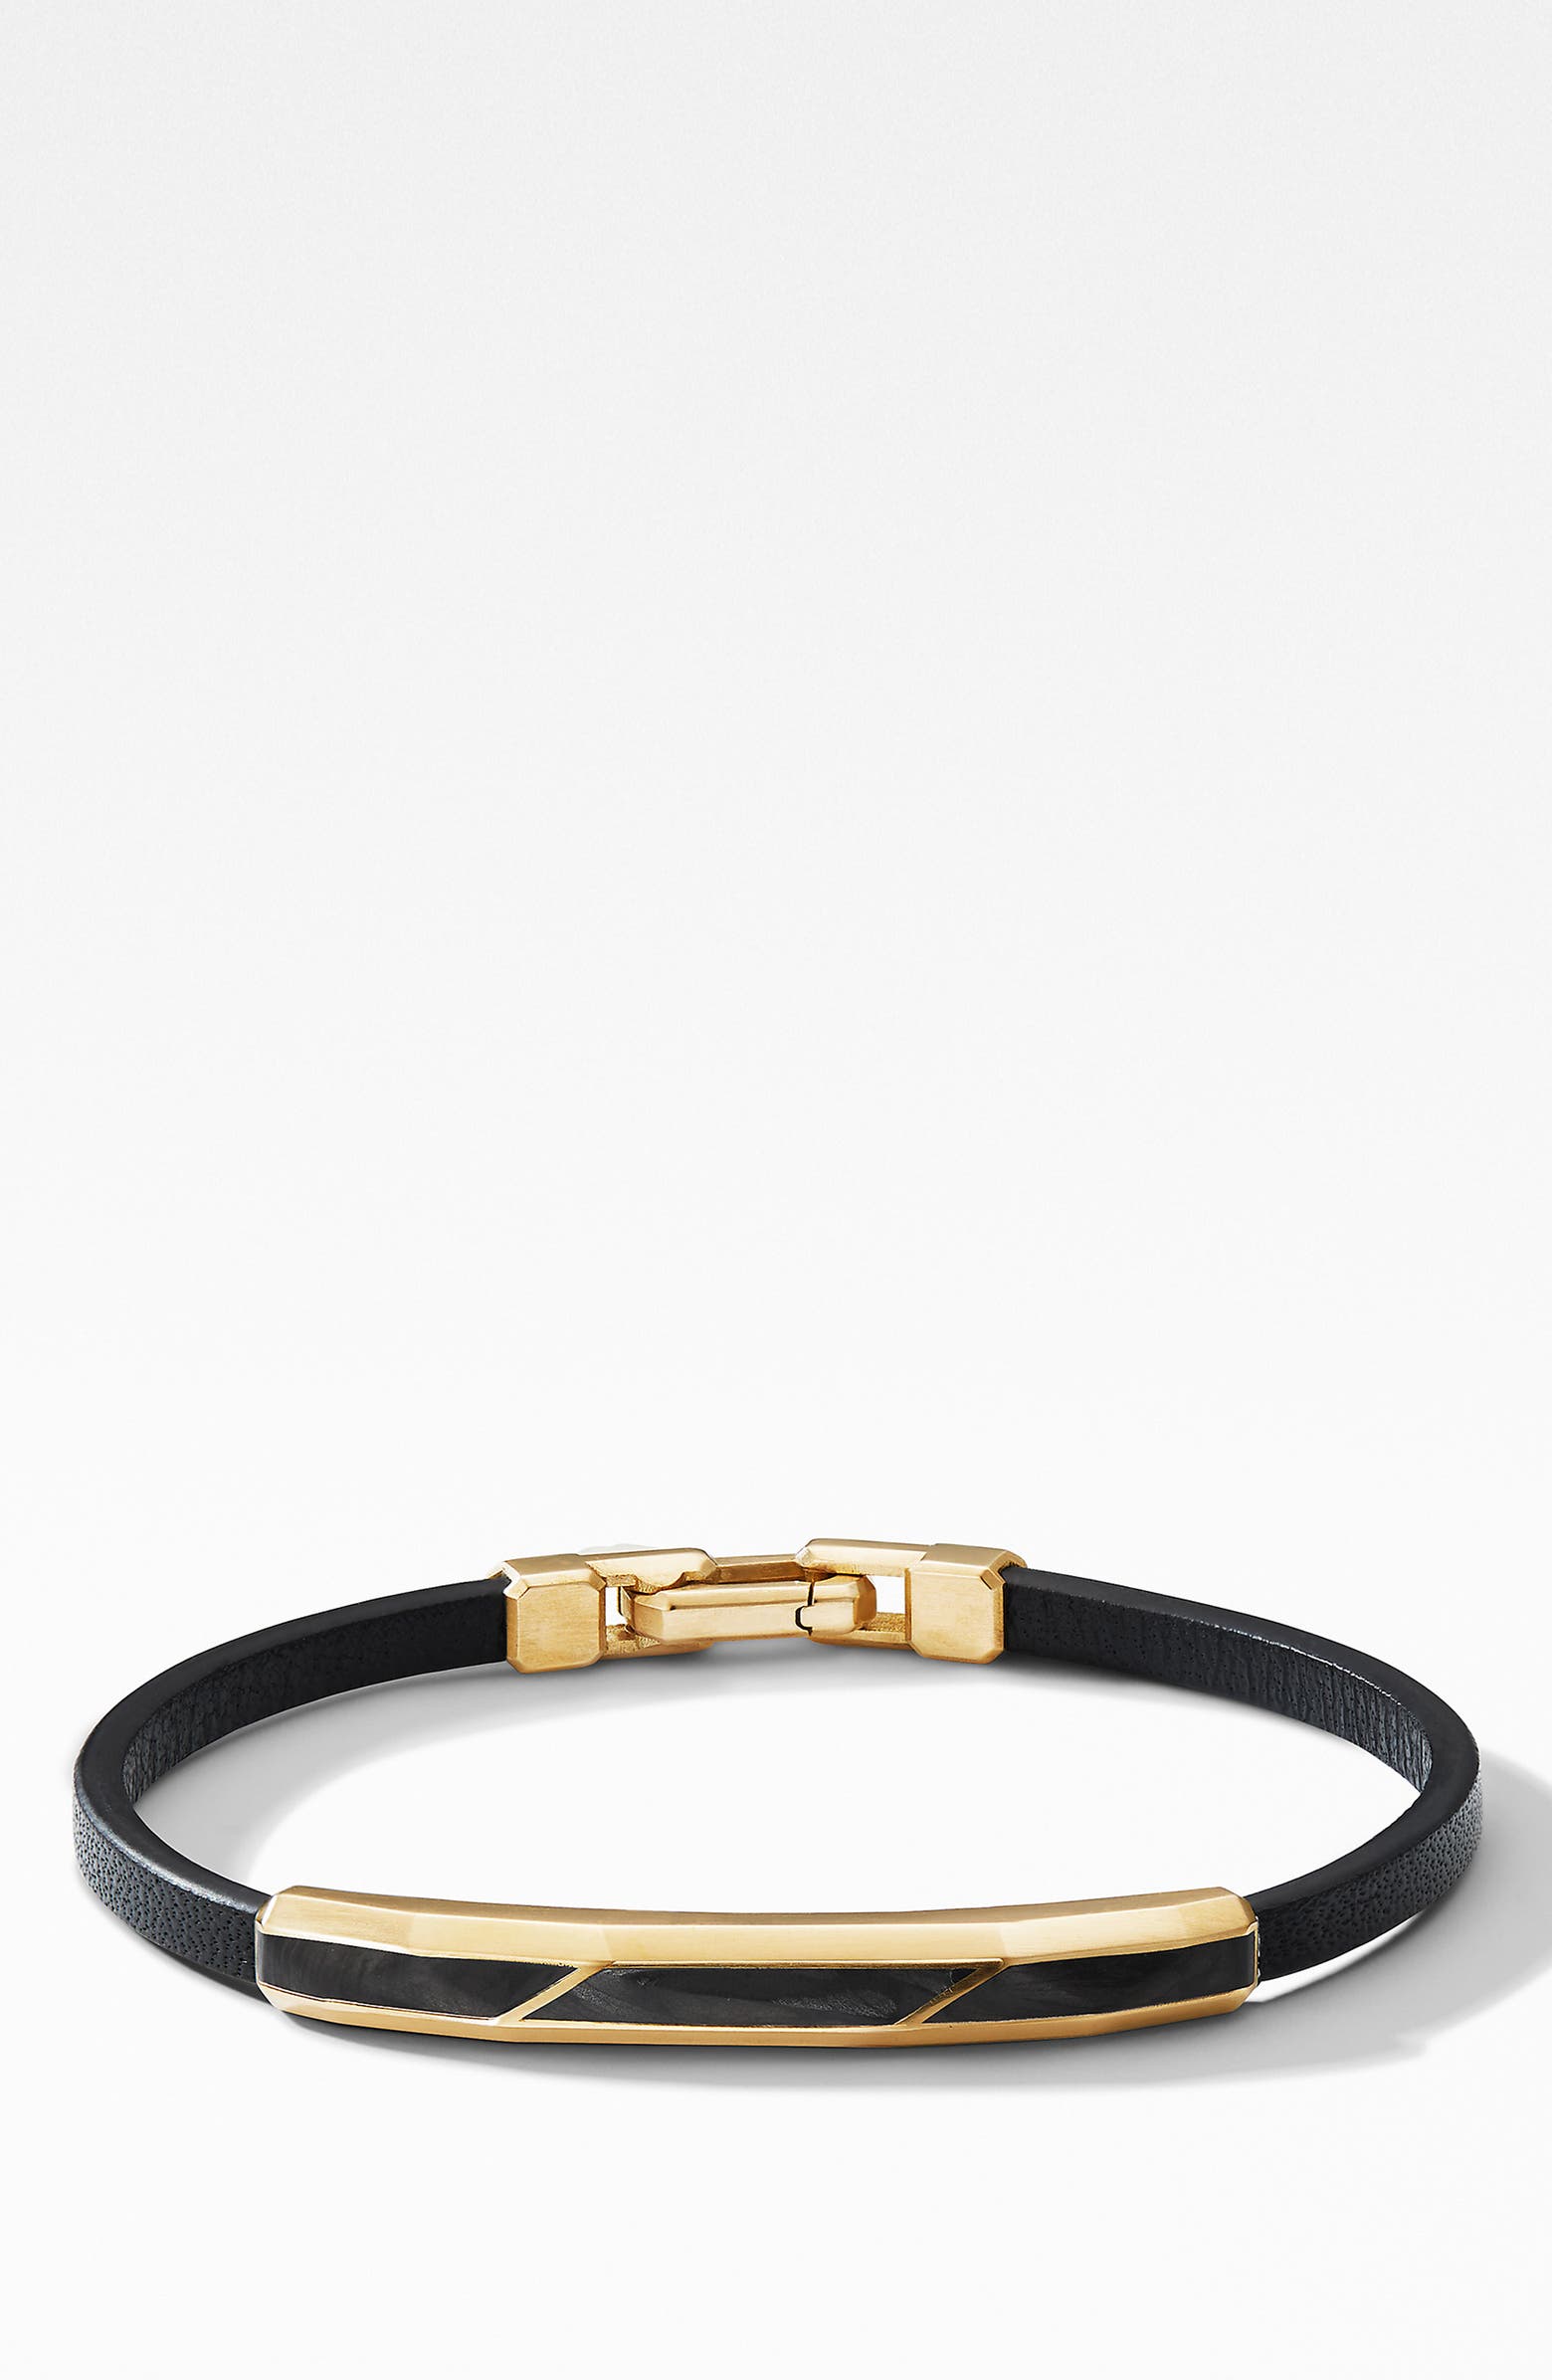 David Yurman Faceted ID Leather Bracelet with Forged Carbon & 18K Gold ...